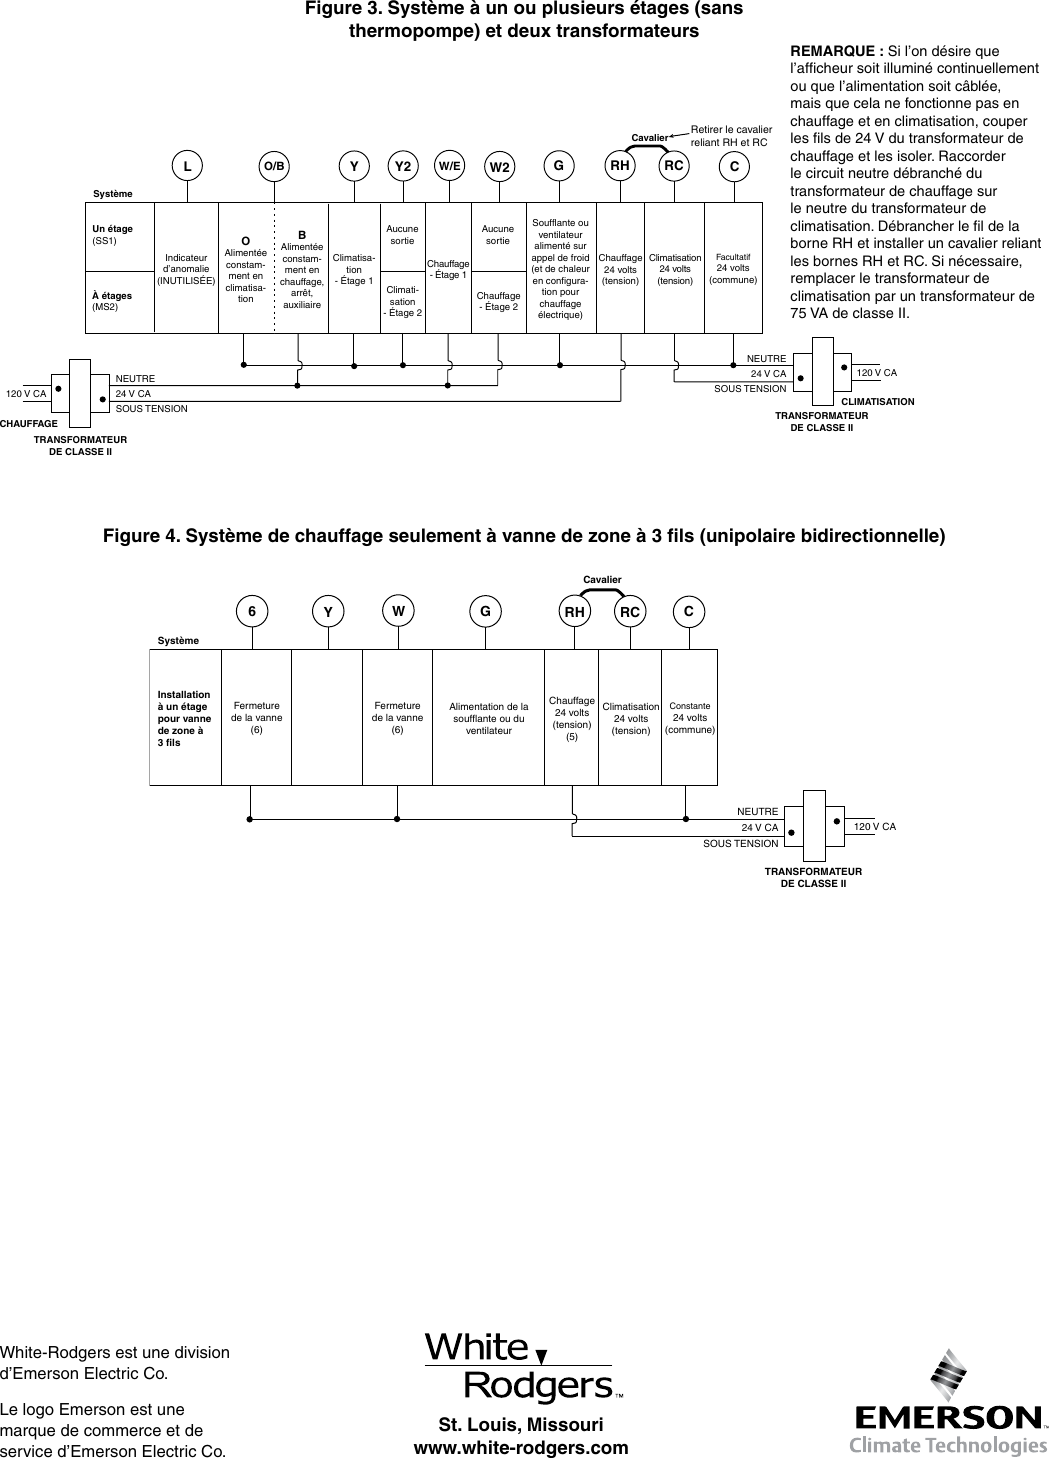 Page 4 of 4 - White-Rodgers White-Rodgers-1F85-0422-Emerson-Blue-4-Programmable-Thermostat-Wiring-Diagram-  White-rodgers-1f85-0422-emerson-blue-4-programmable-thermostat-wiring-diagram